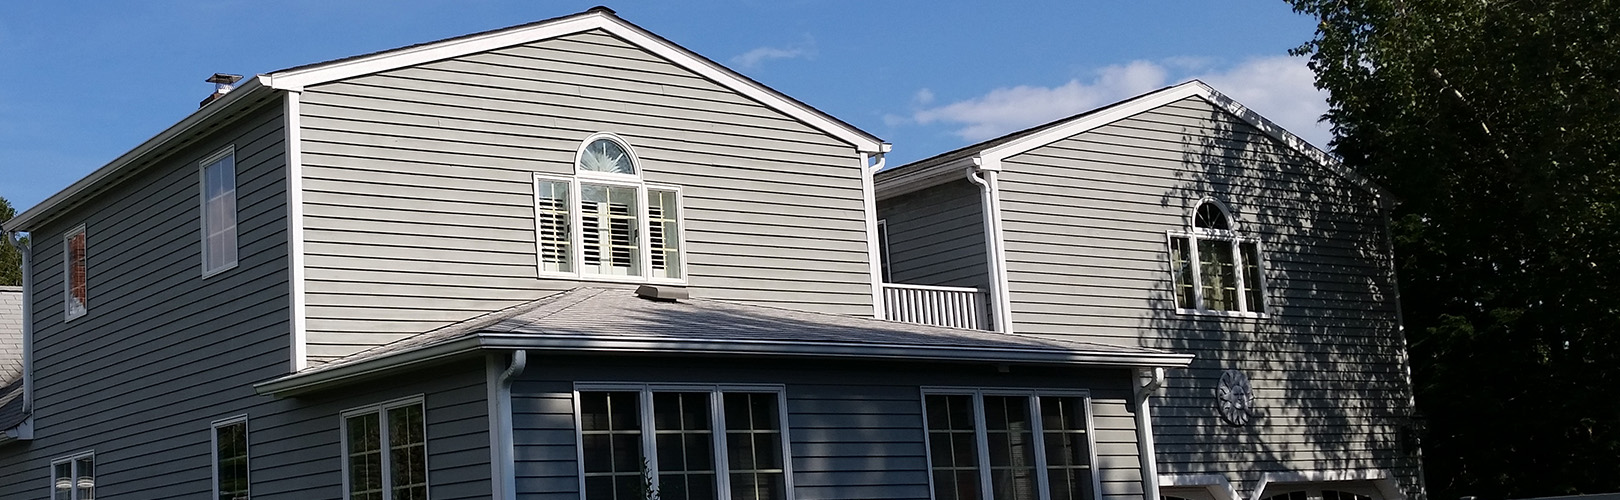 Local Roofing Contractors & Quotes Near Me - North Olmsted OH